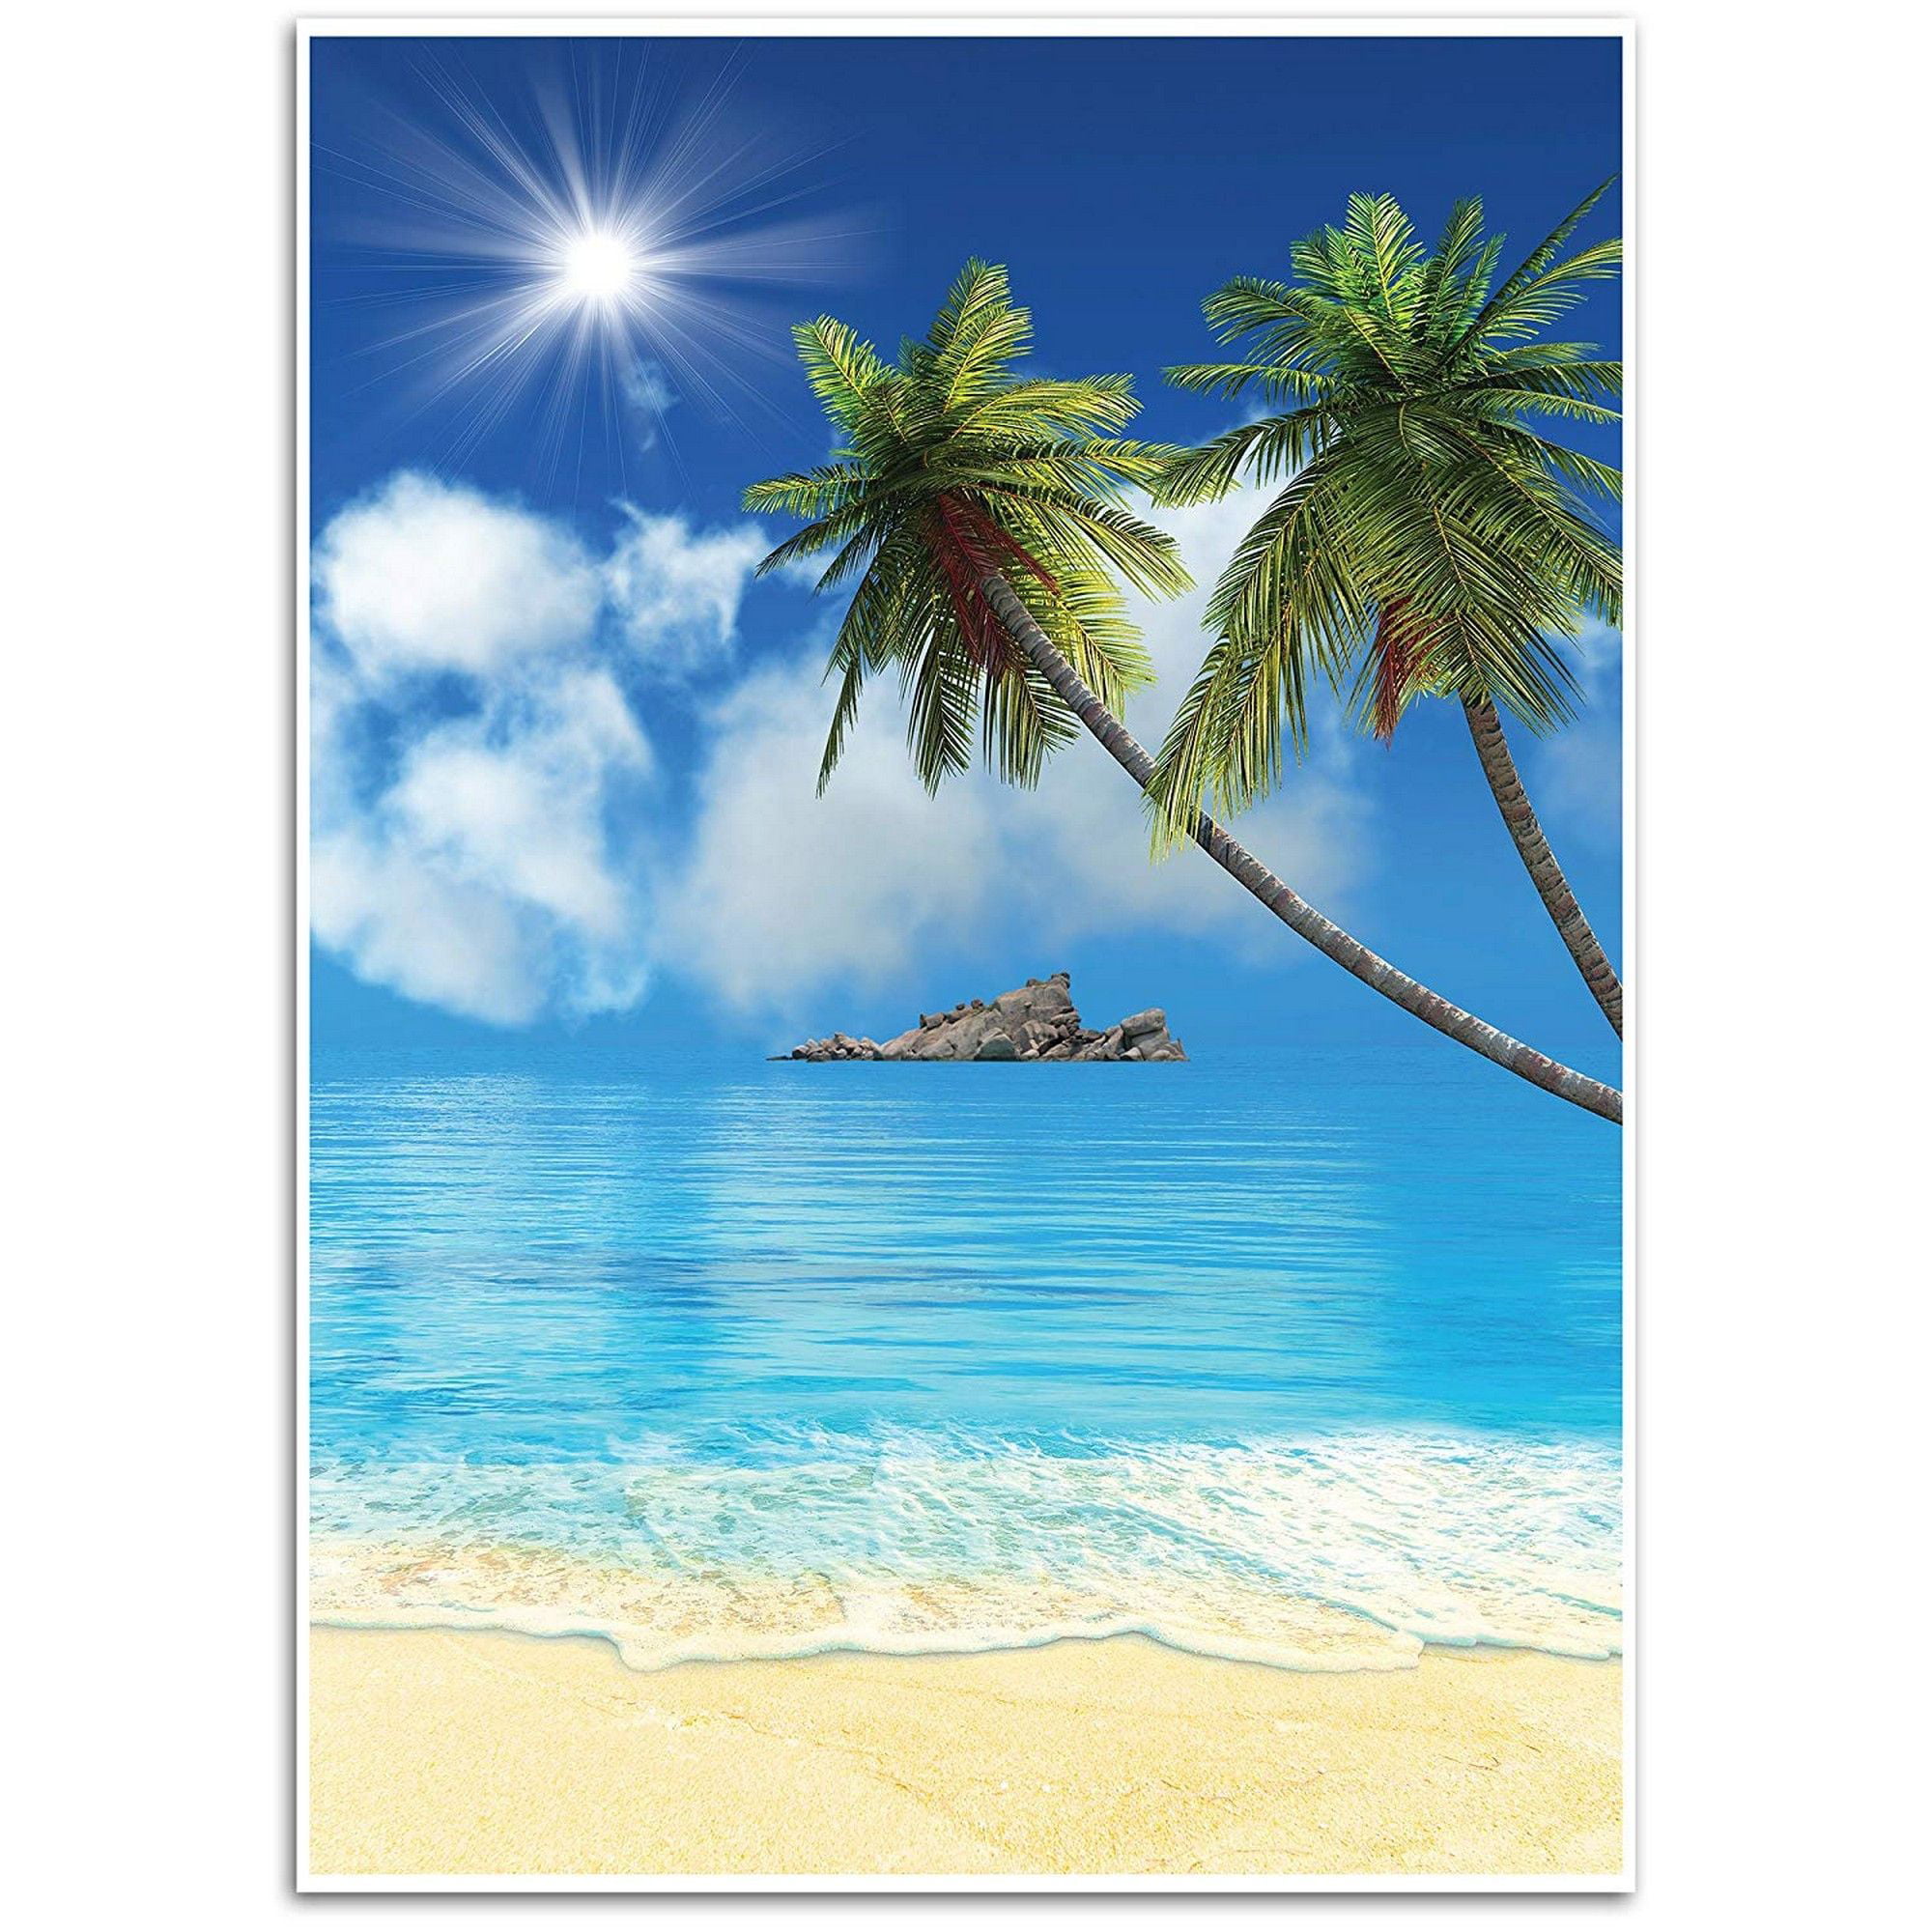 HUAYI sea Ocean Palm Leaf Sand Beach Blue Sky White Hawaii Backdrop Seaside Vacation Photography sea Beach Backgrounds Outdoor Wedding Stage Drape Backdrop vinly Fabric US-W-443-5×7ft 